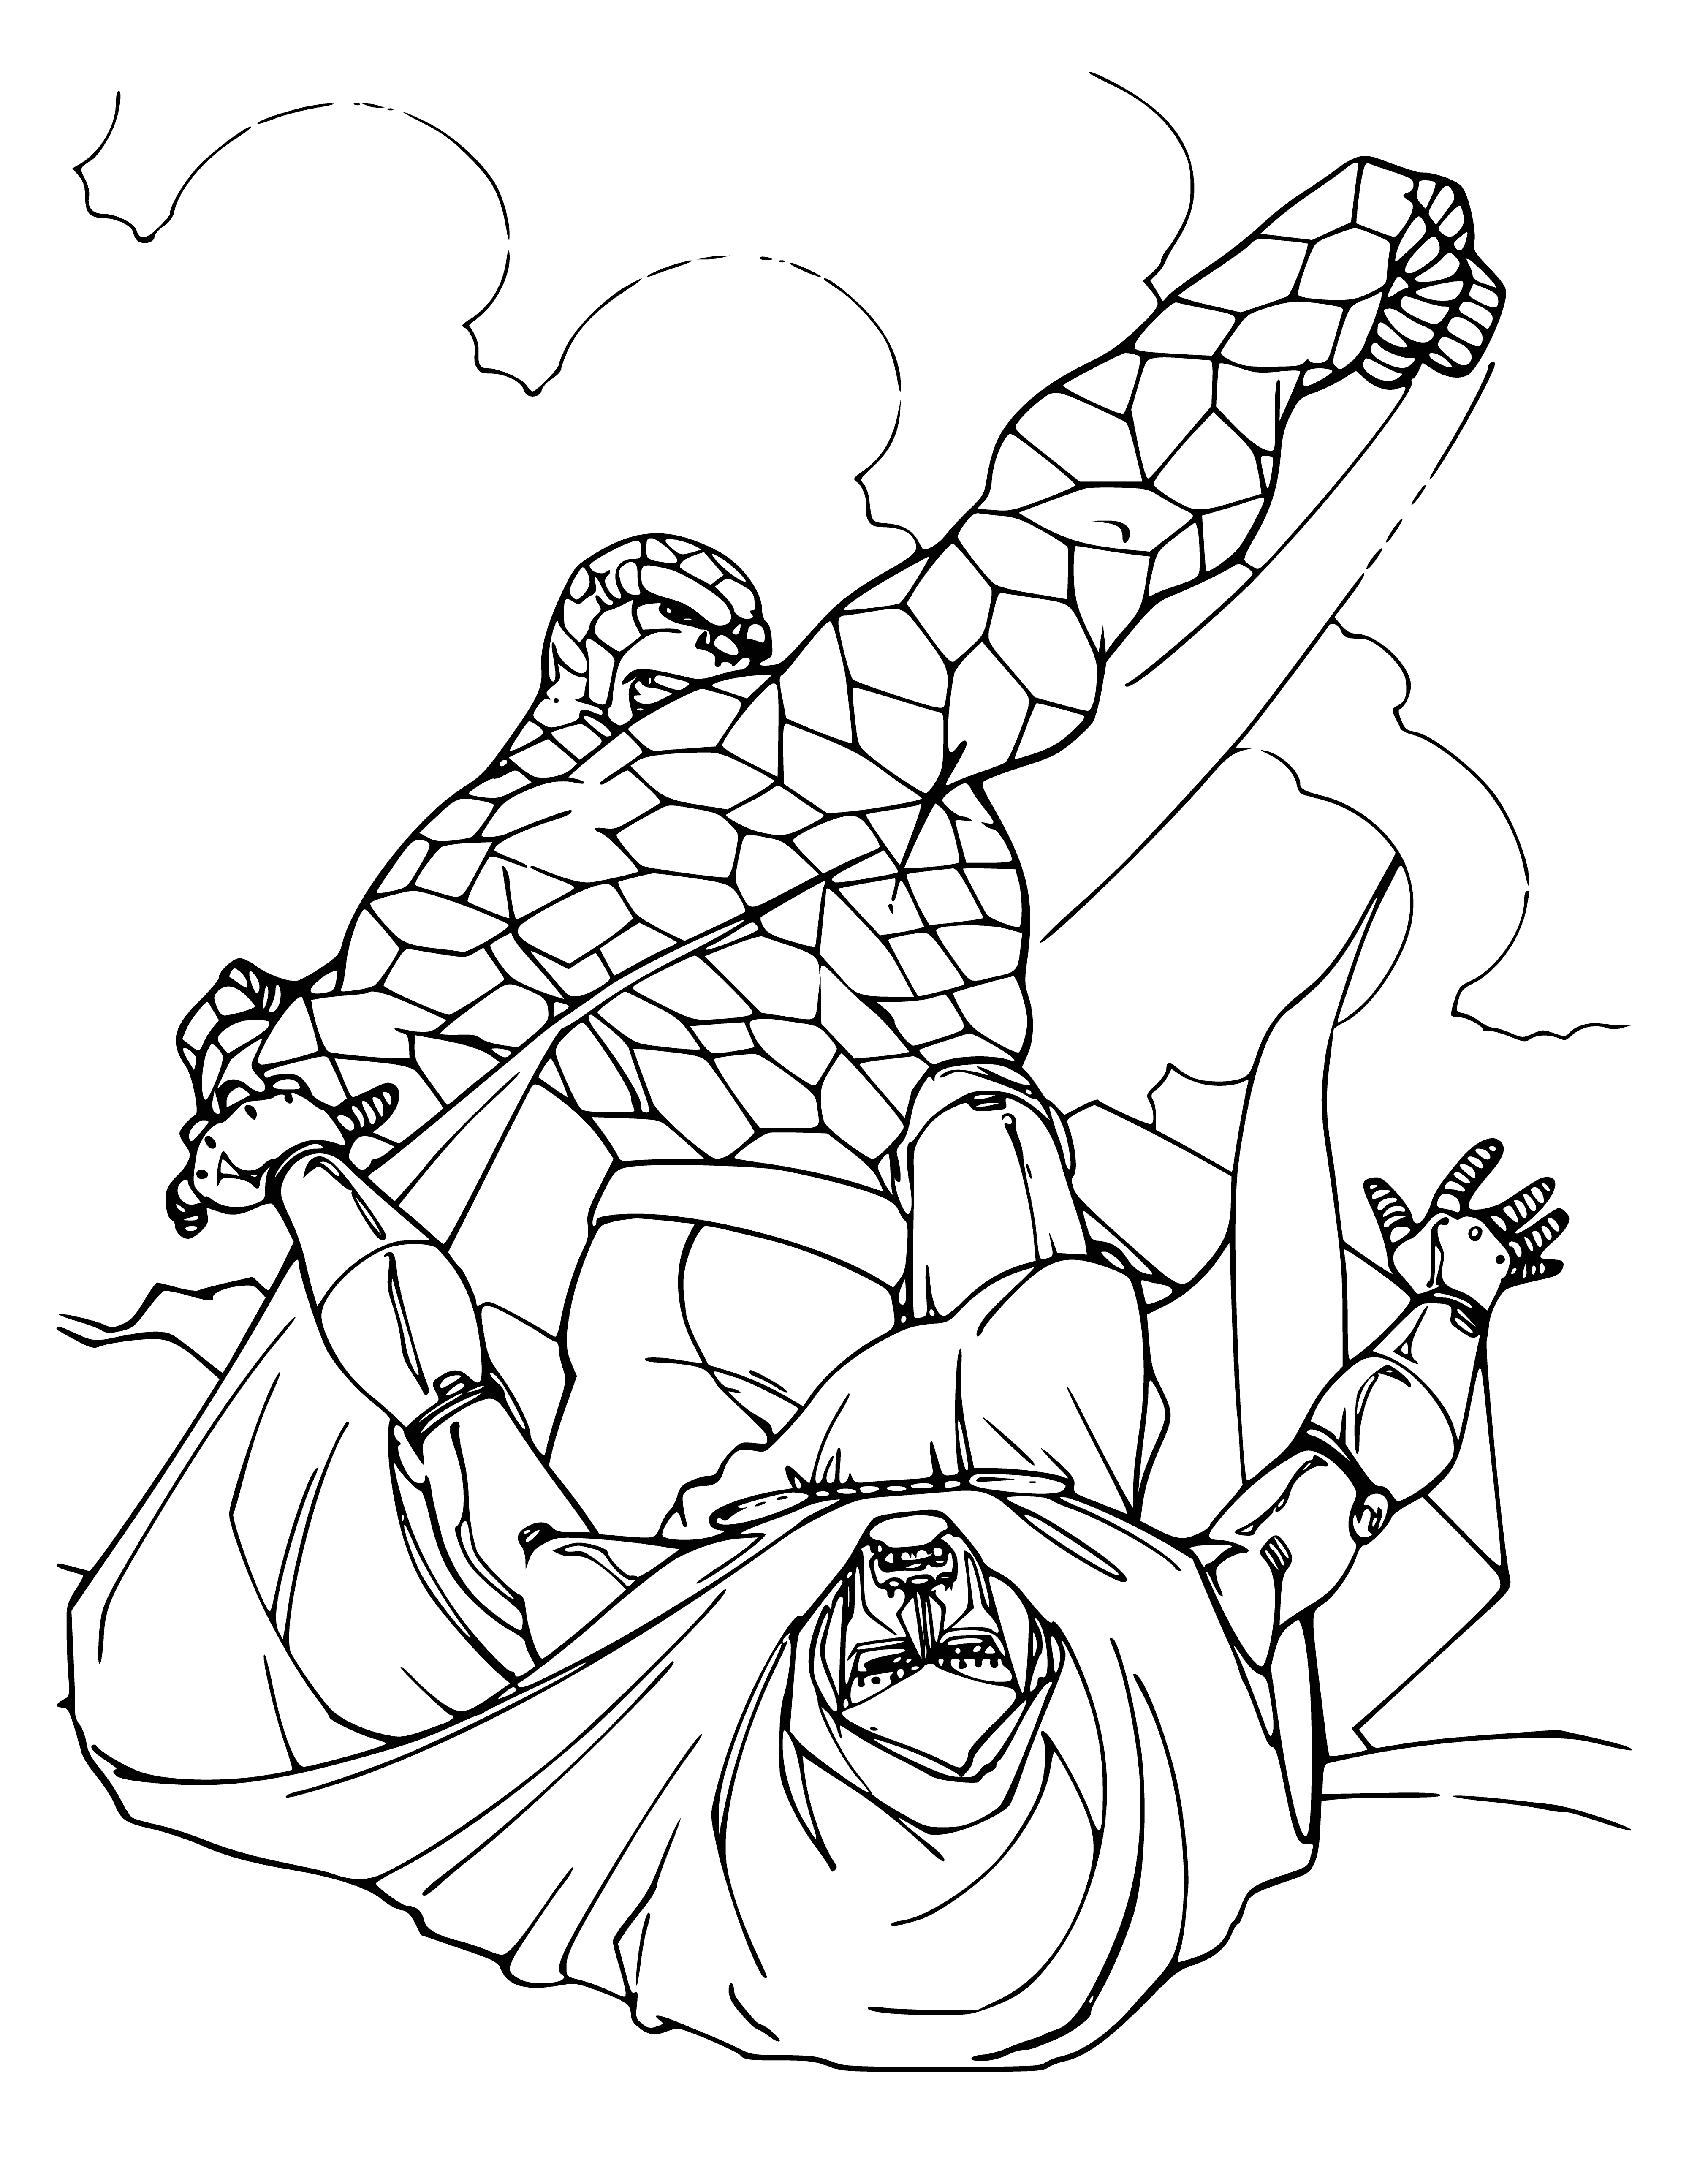 Creature coloring page